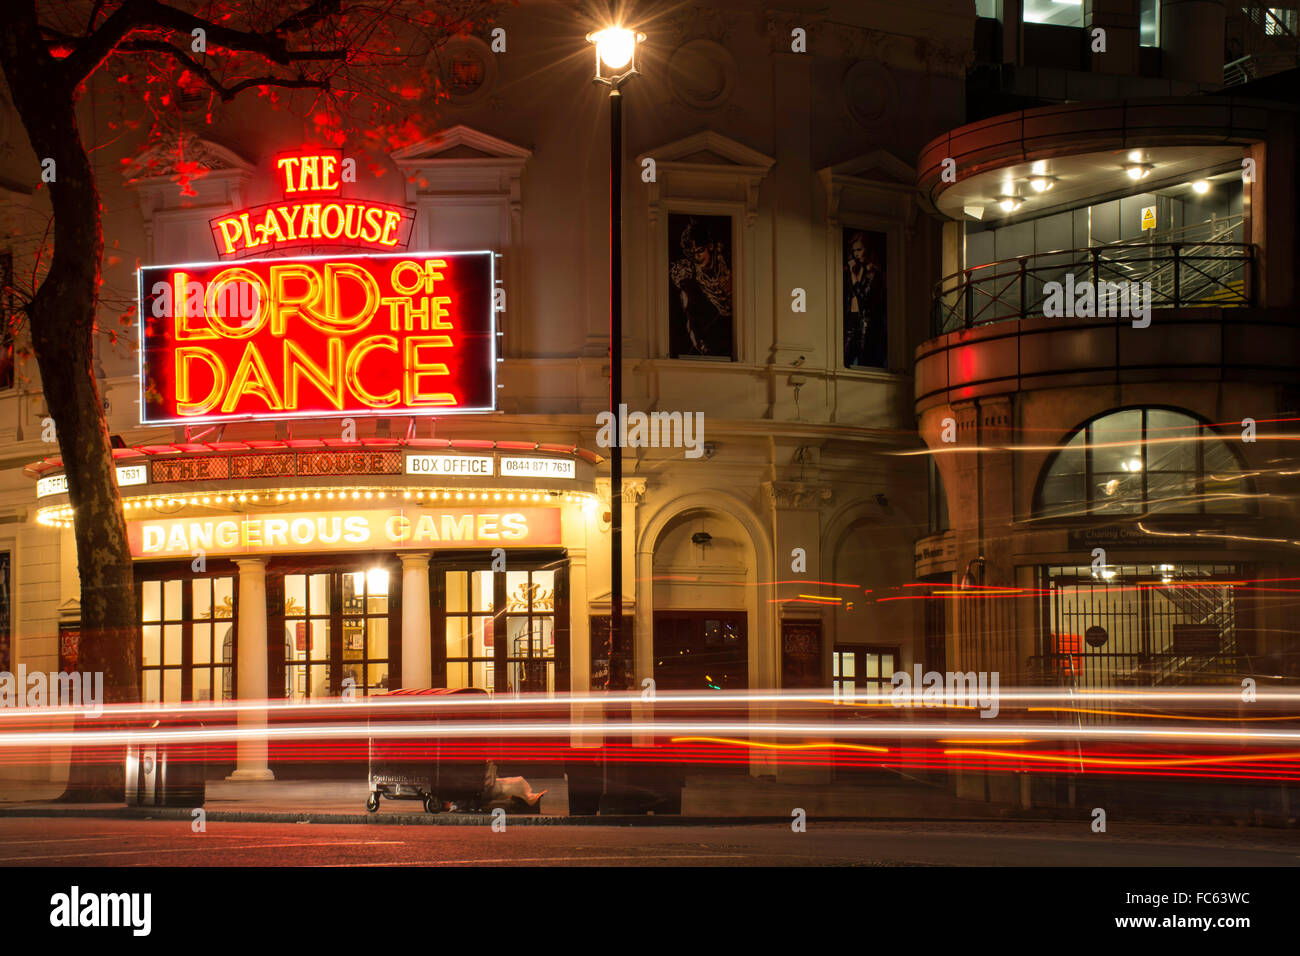 Lord of the Dance at The Playhouse Stock Photo